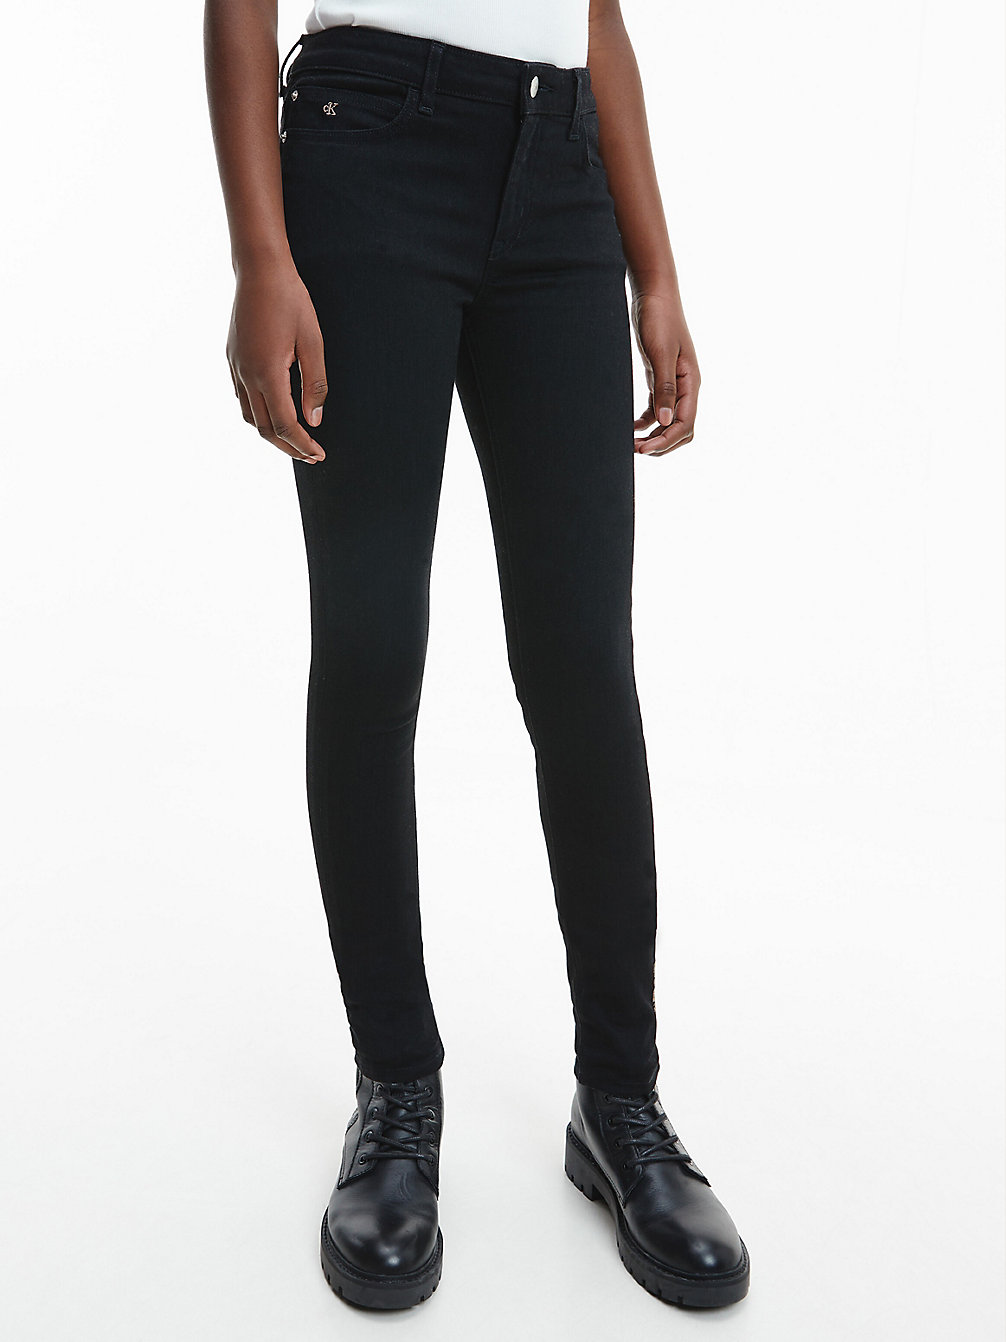 CLEAN BLACK STRETCH Mid Rise Skinny Jeans undefined girls Calvin Klein